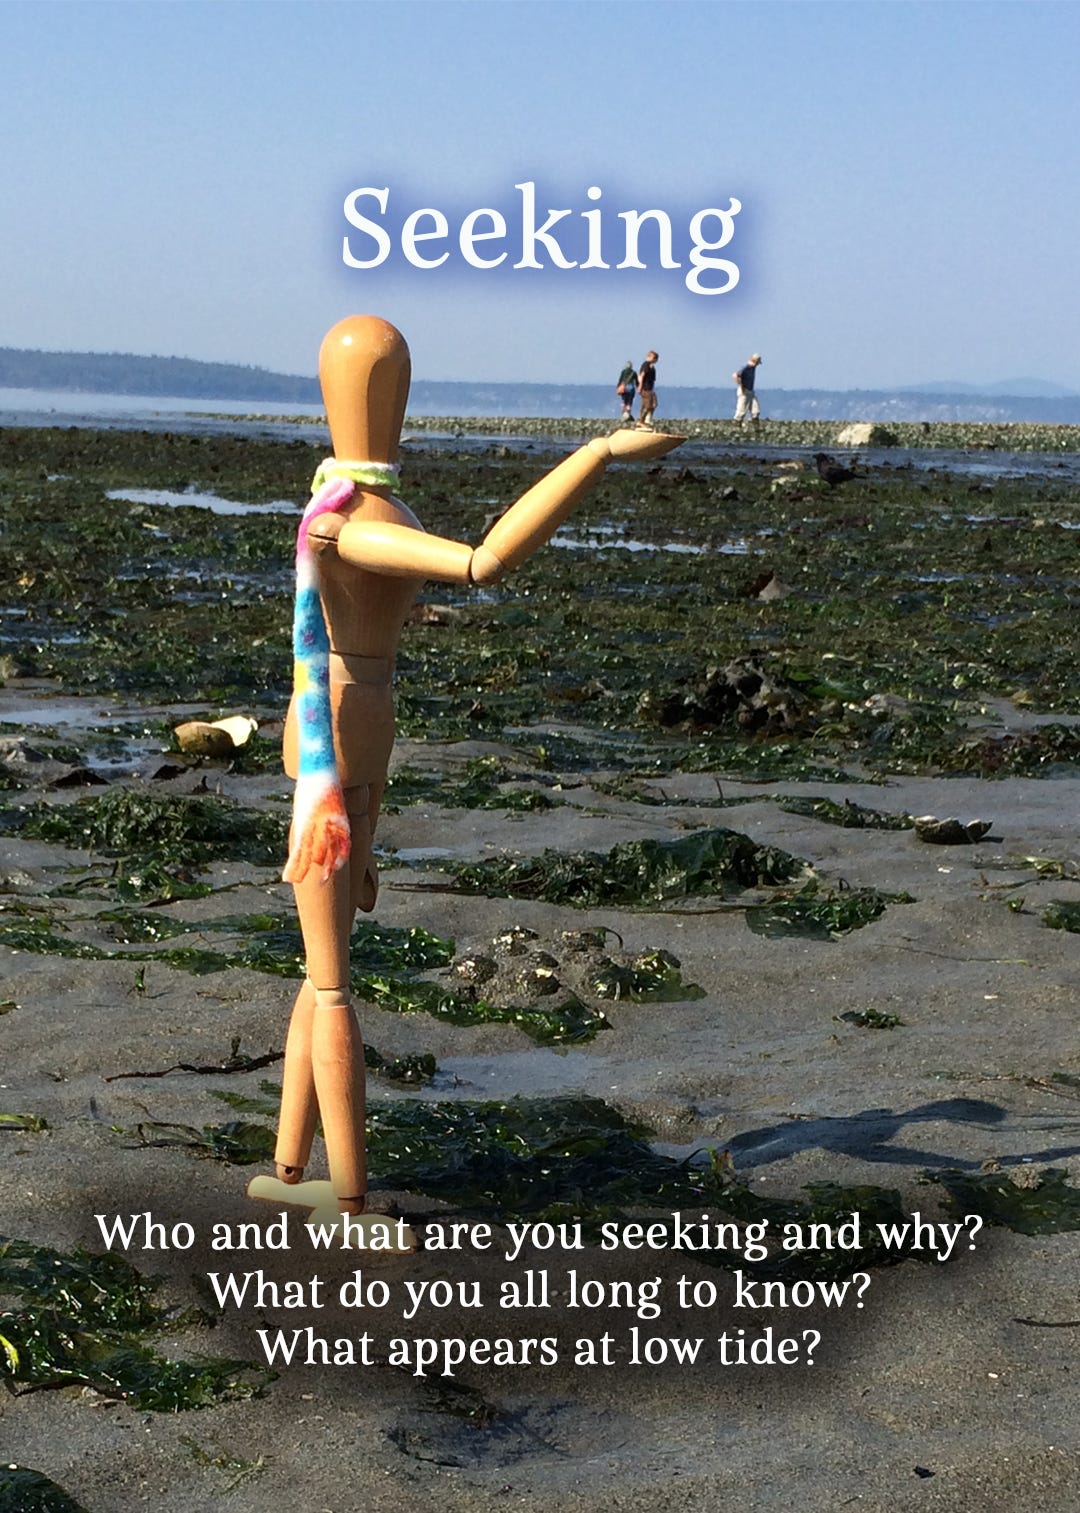 Emotikin at low tide, holding out her hand, as if holding tiny humans in the distance also seeking something at low tide. Title on the image is Seeking and questions in type at the bottom say Who and what are you seeking and why? What do you all long to know? What appears at low tide?